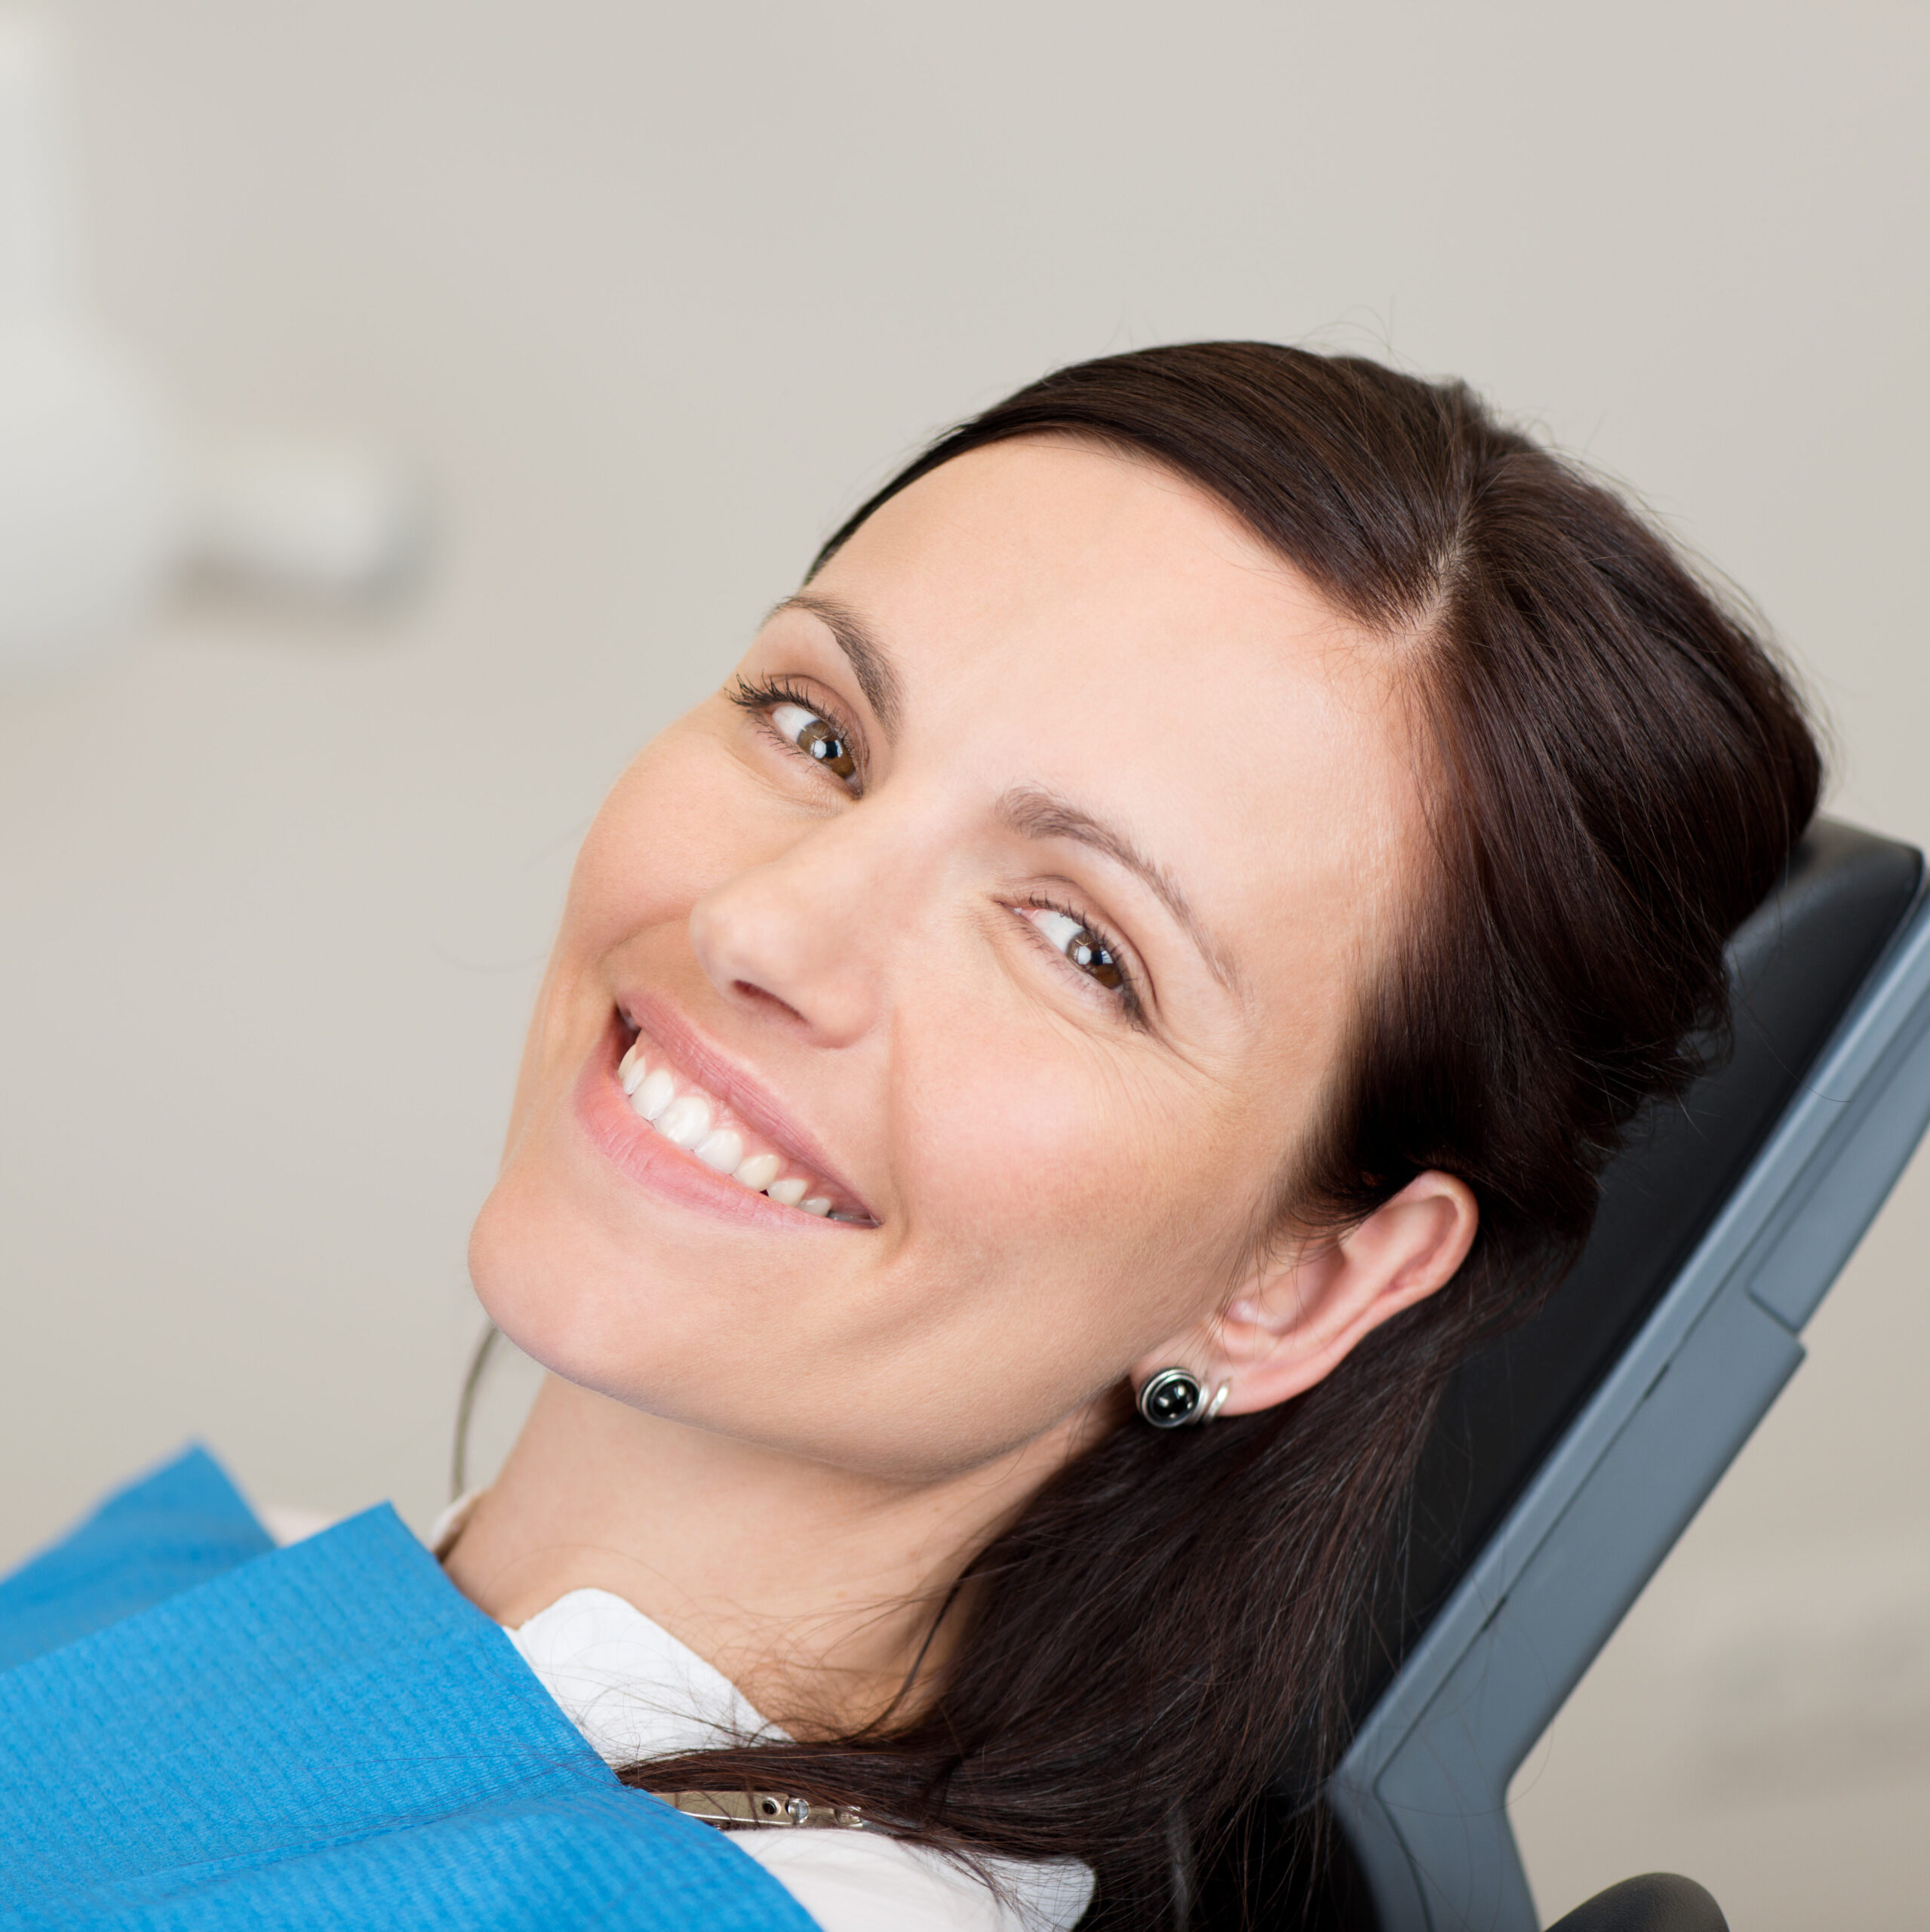 Everything You Should Know About Dental Crowns